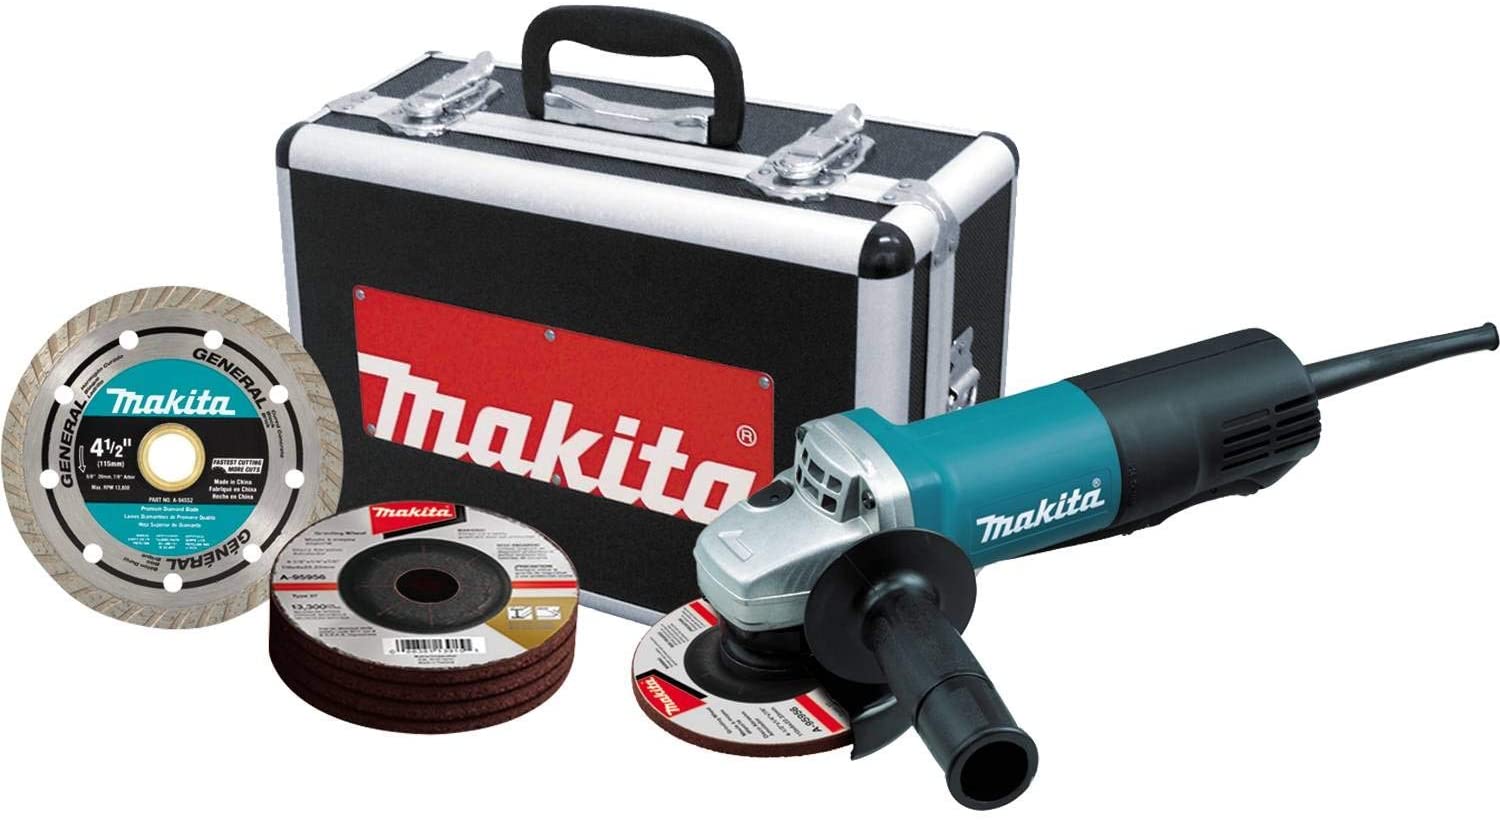 Makita 9557PBX1 4-1/2-Inch Angle Grinder with Aluminum Case